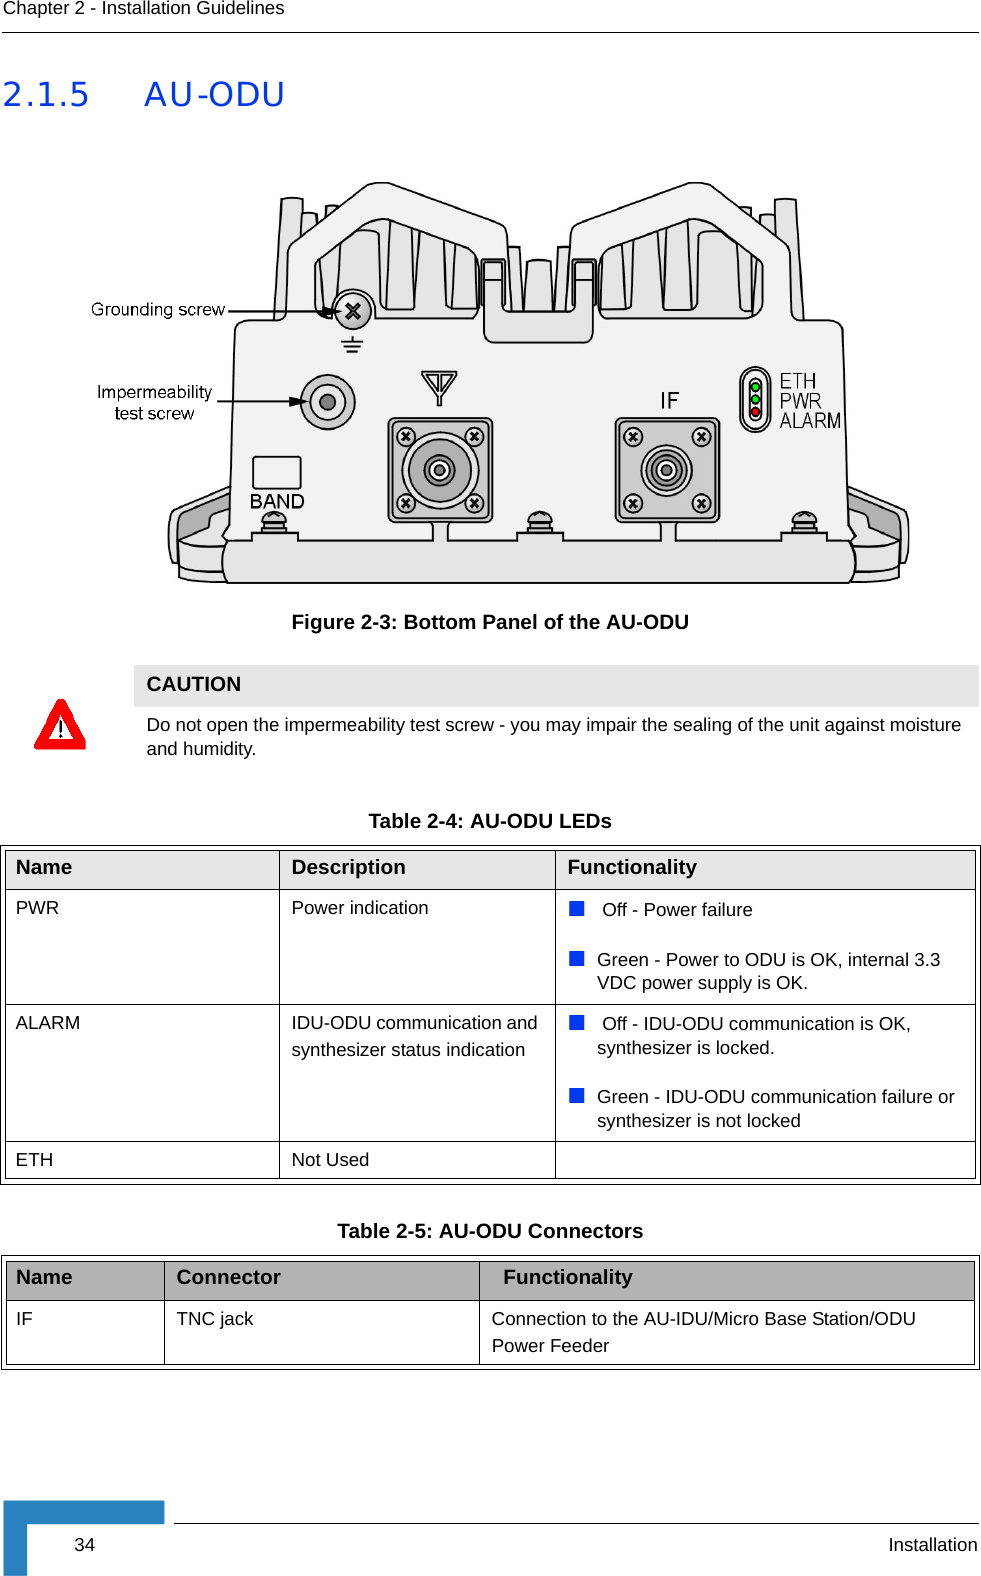 34 InstallationChapter 2 - Installation Guidelines2.1.5 AU-ODUFigure 2-3: Bottom Panel of the AU-ODUCAUTIONDo not open the impermeability test screw - you may impair the sealing of the unit against moisture and humidity.Table 2-4: AU-ODU LEDsName Description FunctionalityPWR Power indication  Off - Power failureGreen - Power to ODU is OK, internal 3.3 VDC power supply is OK.ALARM IDU-ODU communication and synthesizer status indication Off - IDU-ODU communication is OK, synthesizer is locked.Green - IDU-ODU communication failure or synthesizer is not lockedETH Not UsedTable 2-5: AU-ODU ConnectorsName Connector   FunctionalityIF TNC jack Connection to the AU-IDU/Micro Base Station/ODU Power Feeder